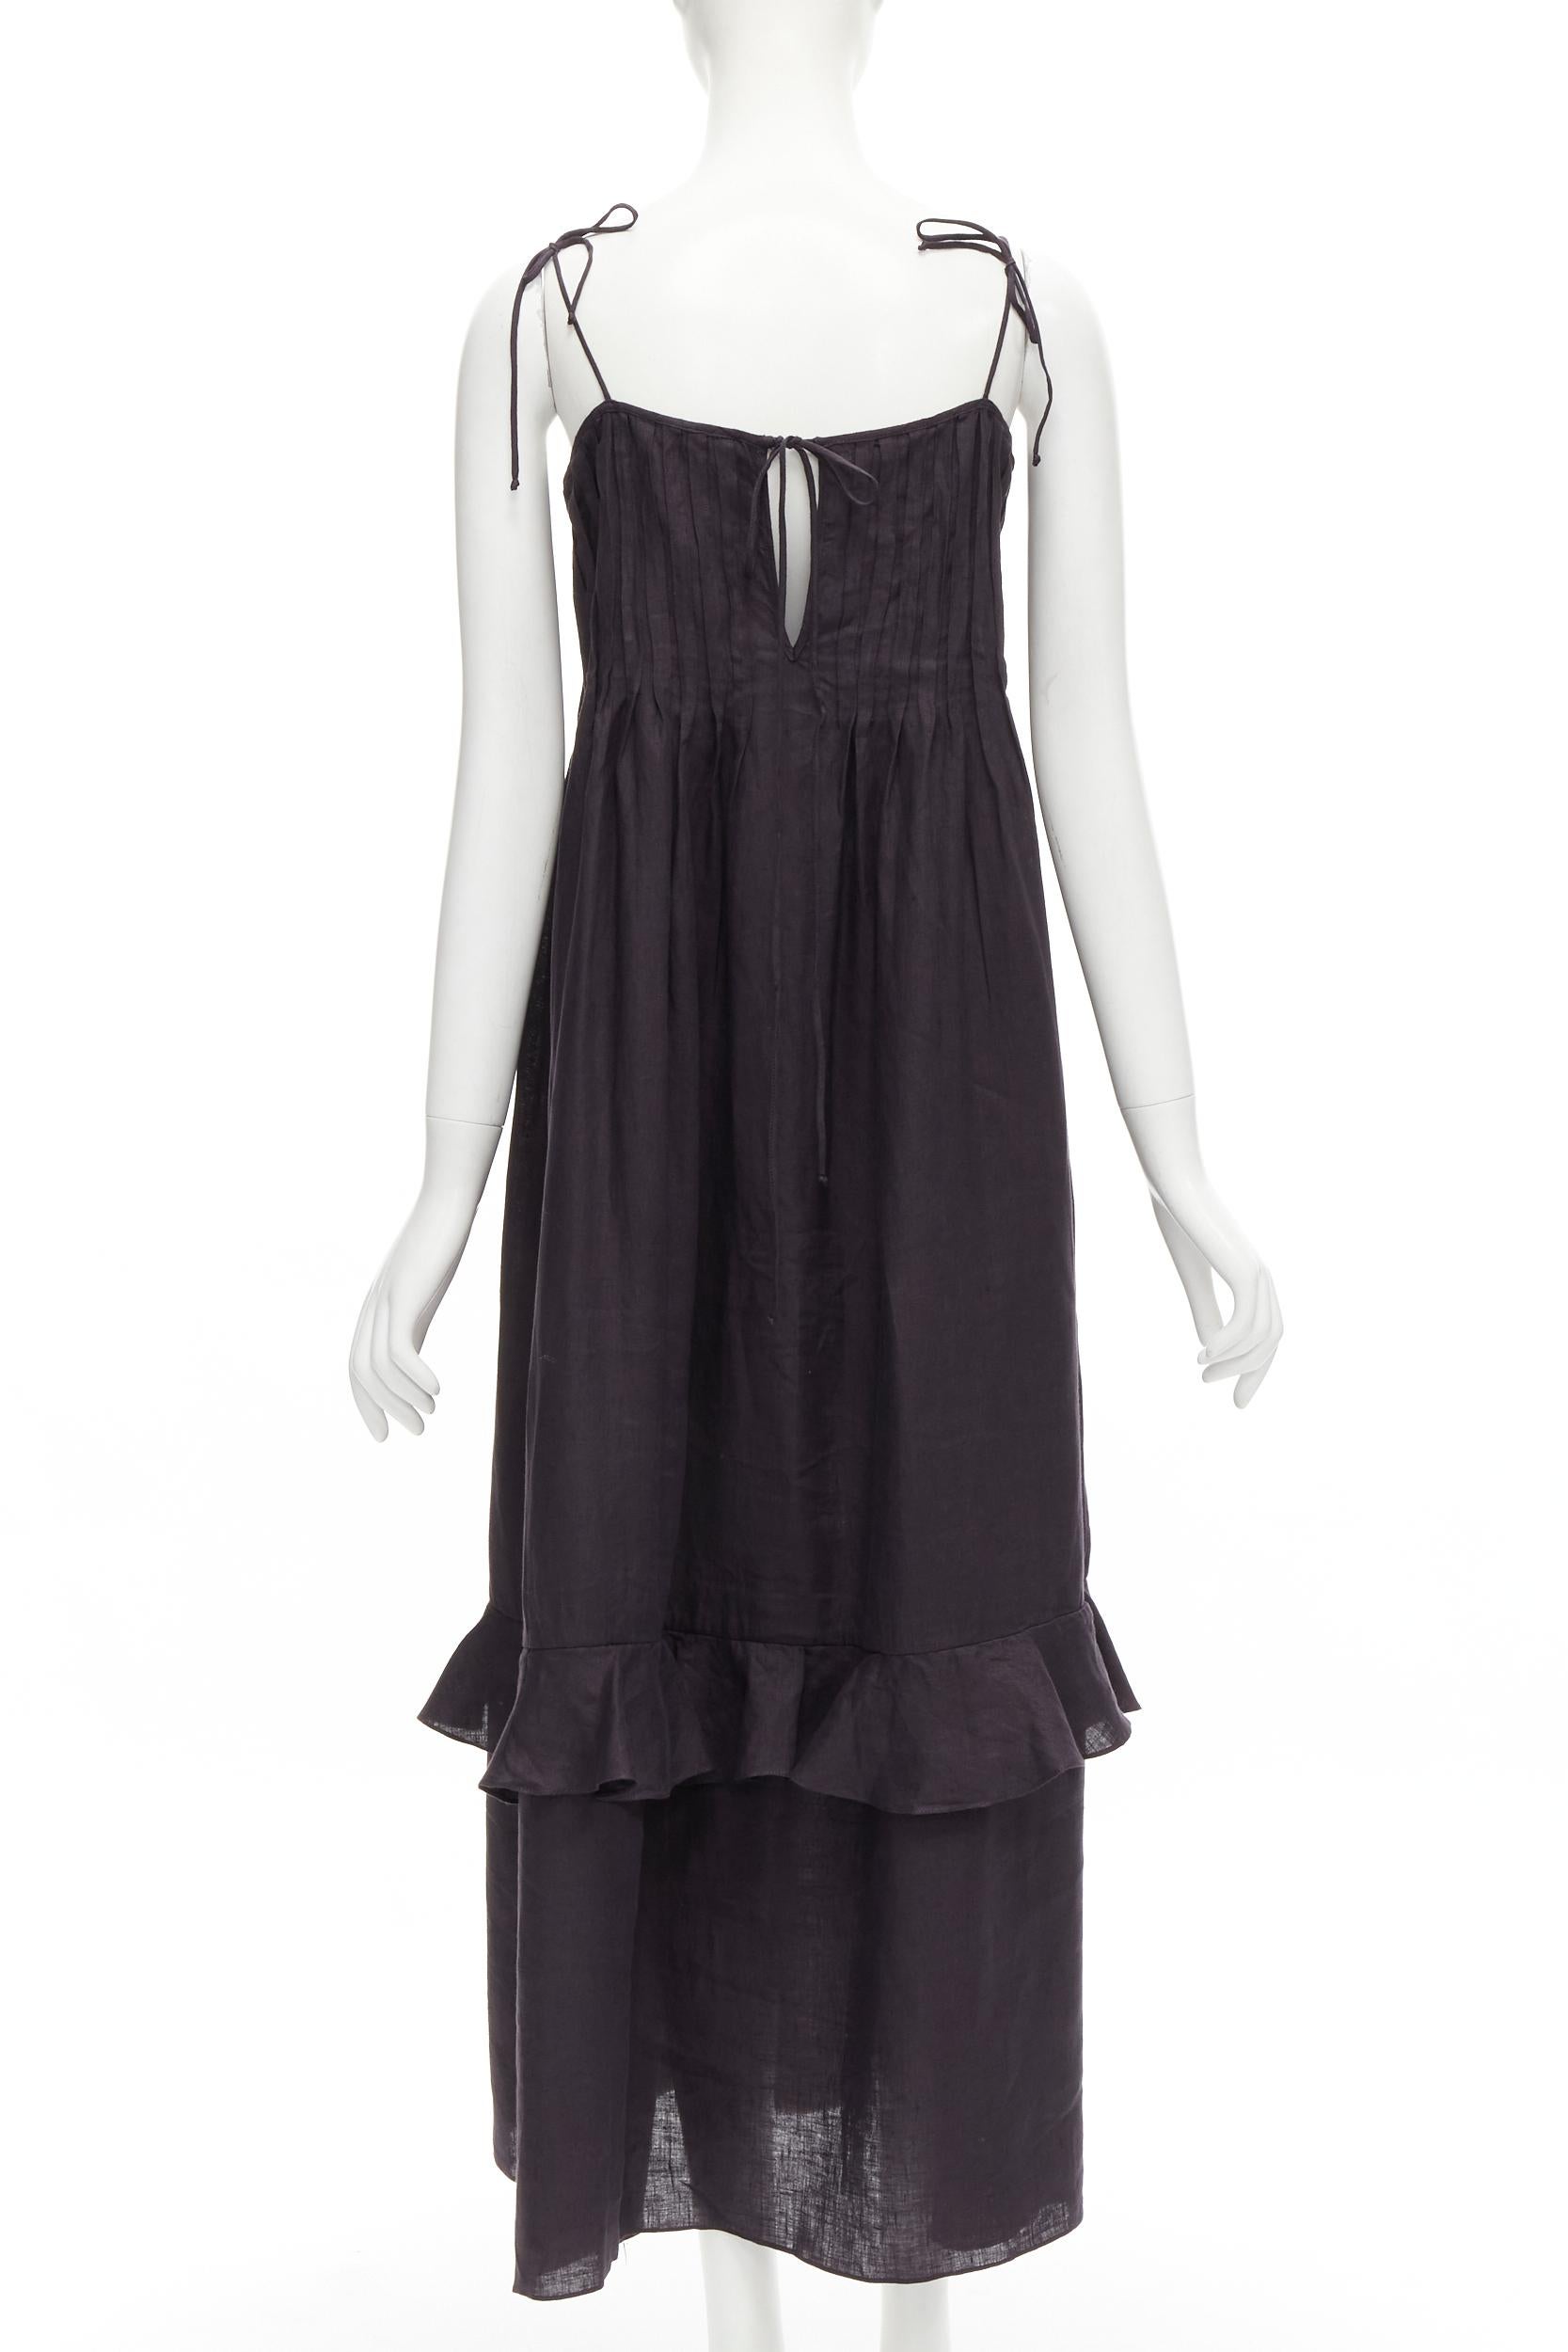 Black THREE GRACES LONDON black washed cotton pelated bust frill trim maxi dress UK8 S For Sale